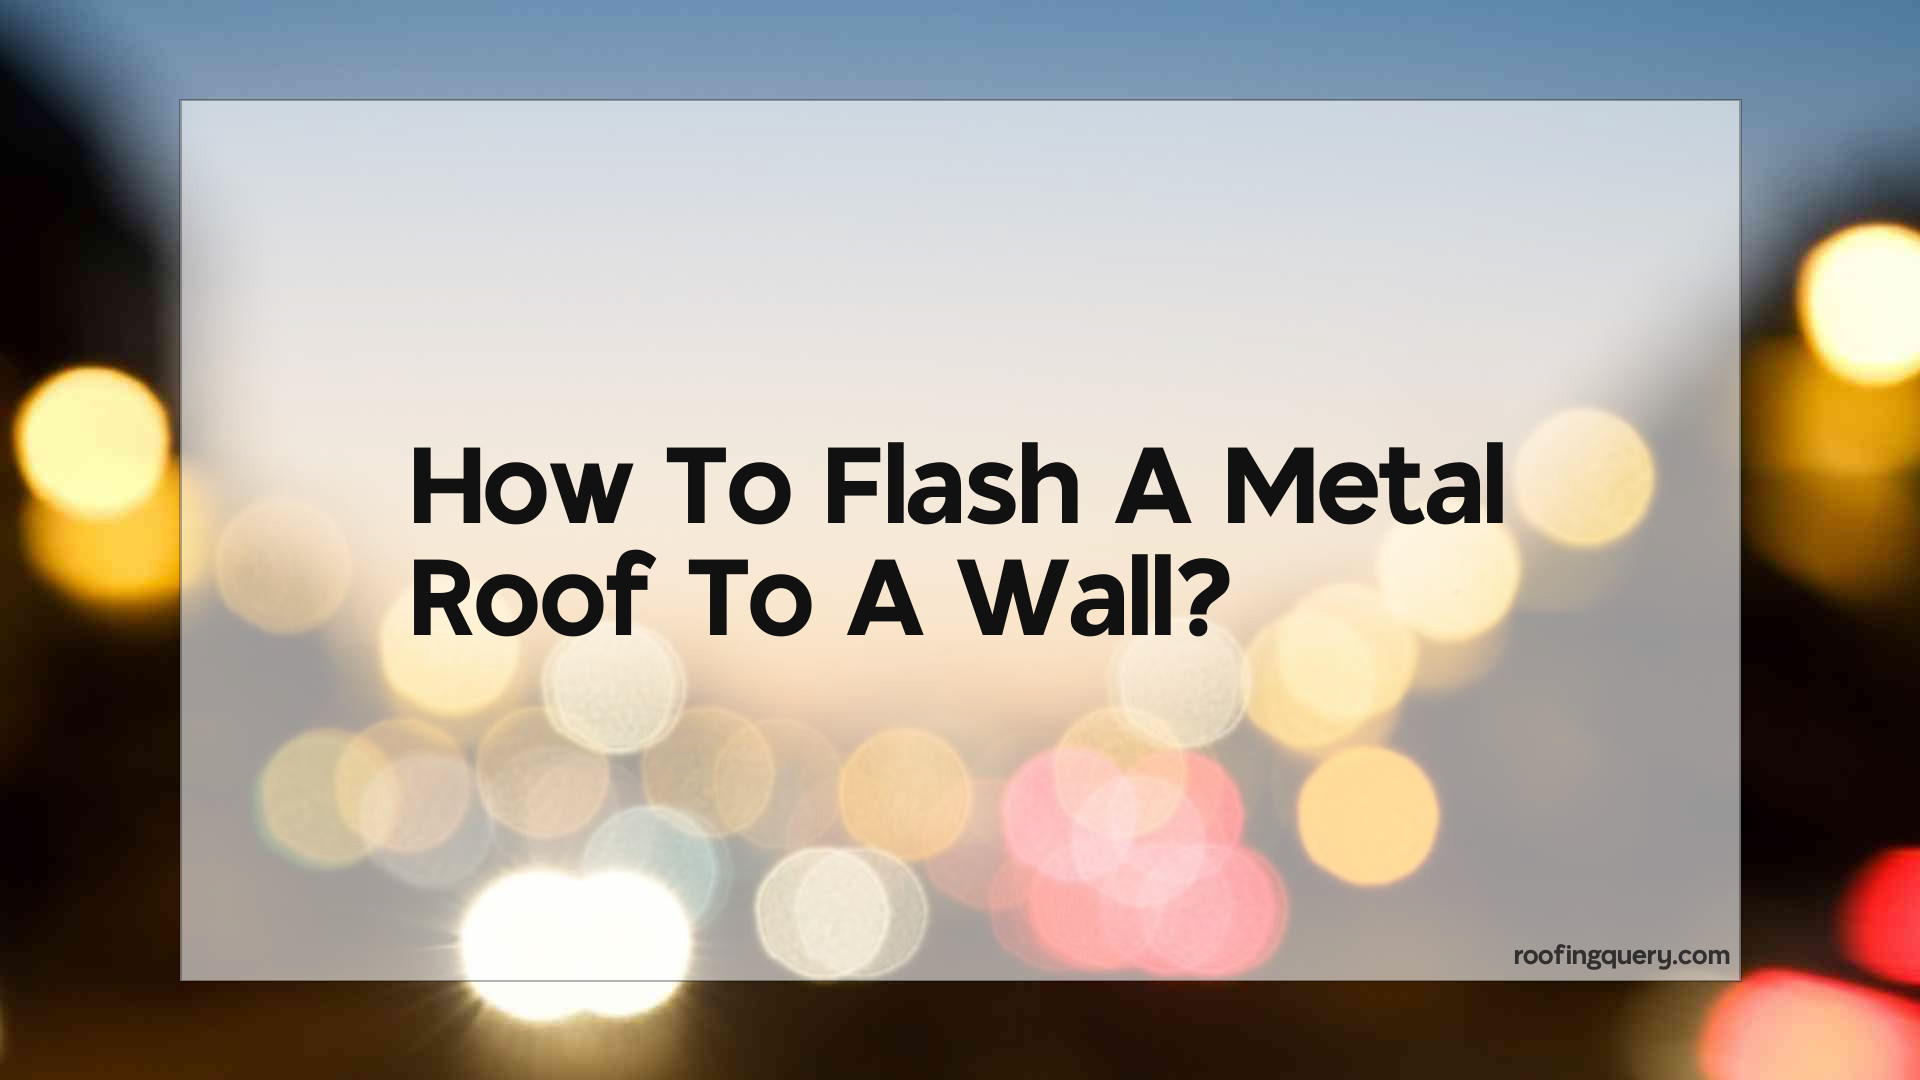 How To Flash A Metal Roof To A Wall